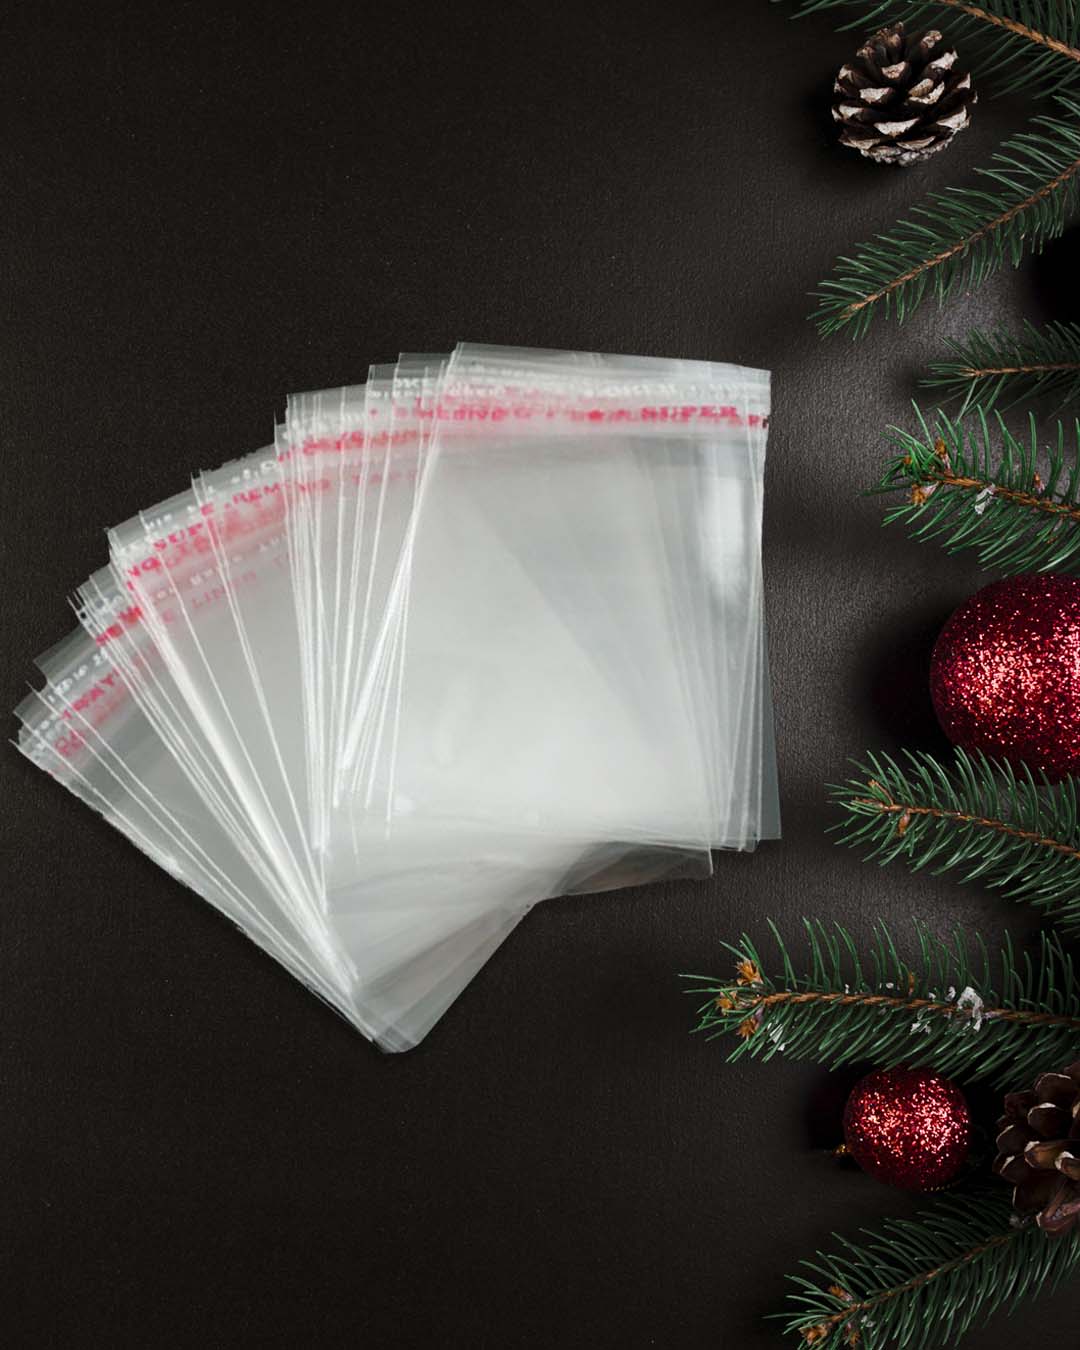 Polyprop Cellophane Selfseal Bags 30x40cm+4mm 100pack